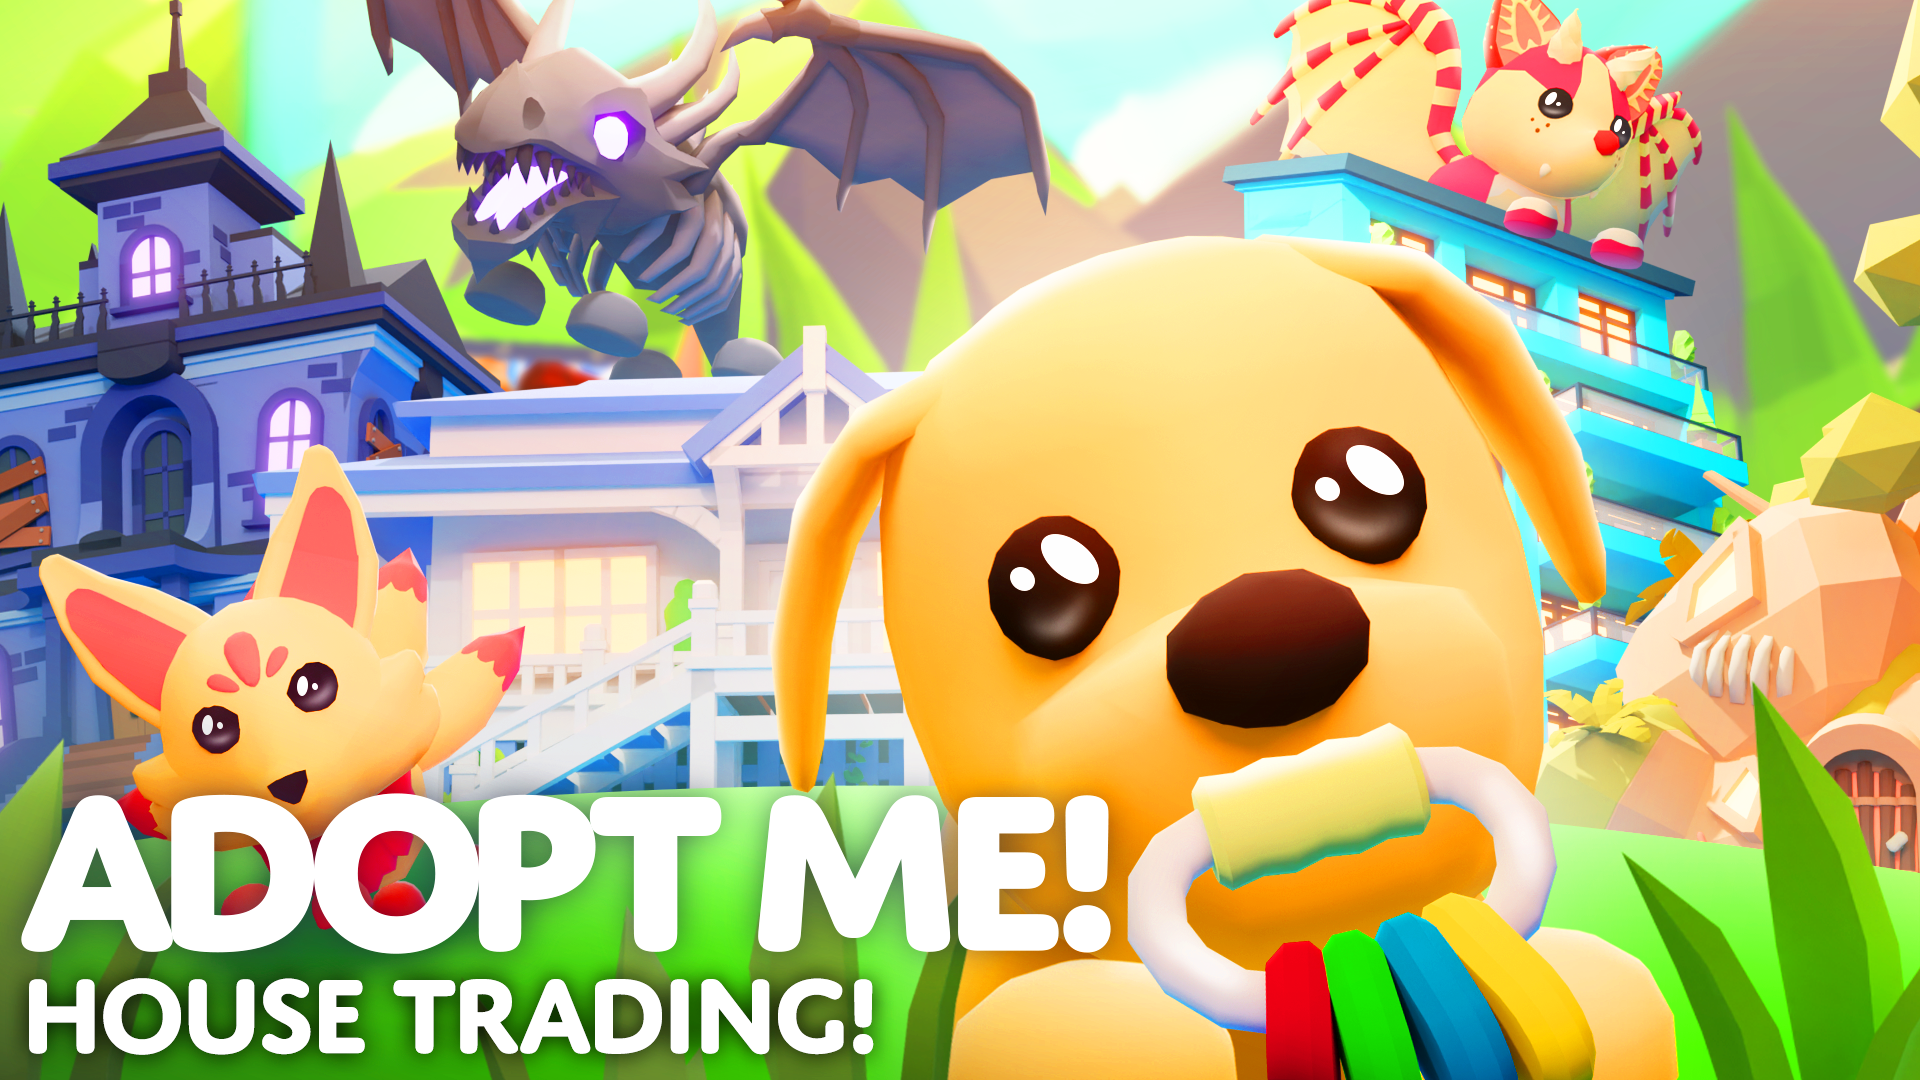 The Dog, Kitsune, Shadow Dragon, and Strawberry Shortcake Bat Dragon welcome you to the House Trading update in Adopt Me! Each pet is resting on a different kind of house: the Queensland Mansion, Spooky Halloween House, and Apartment Blocks! 